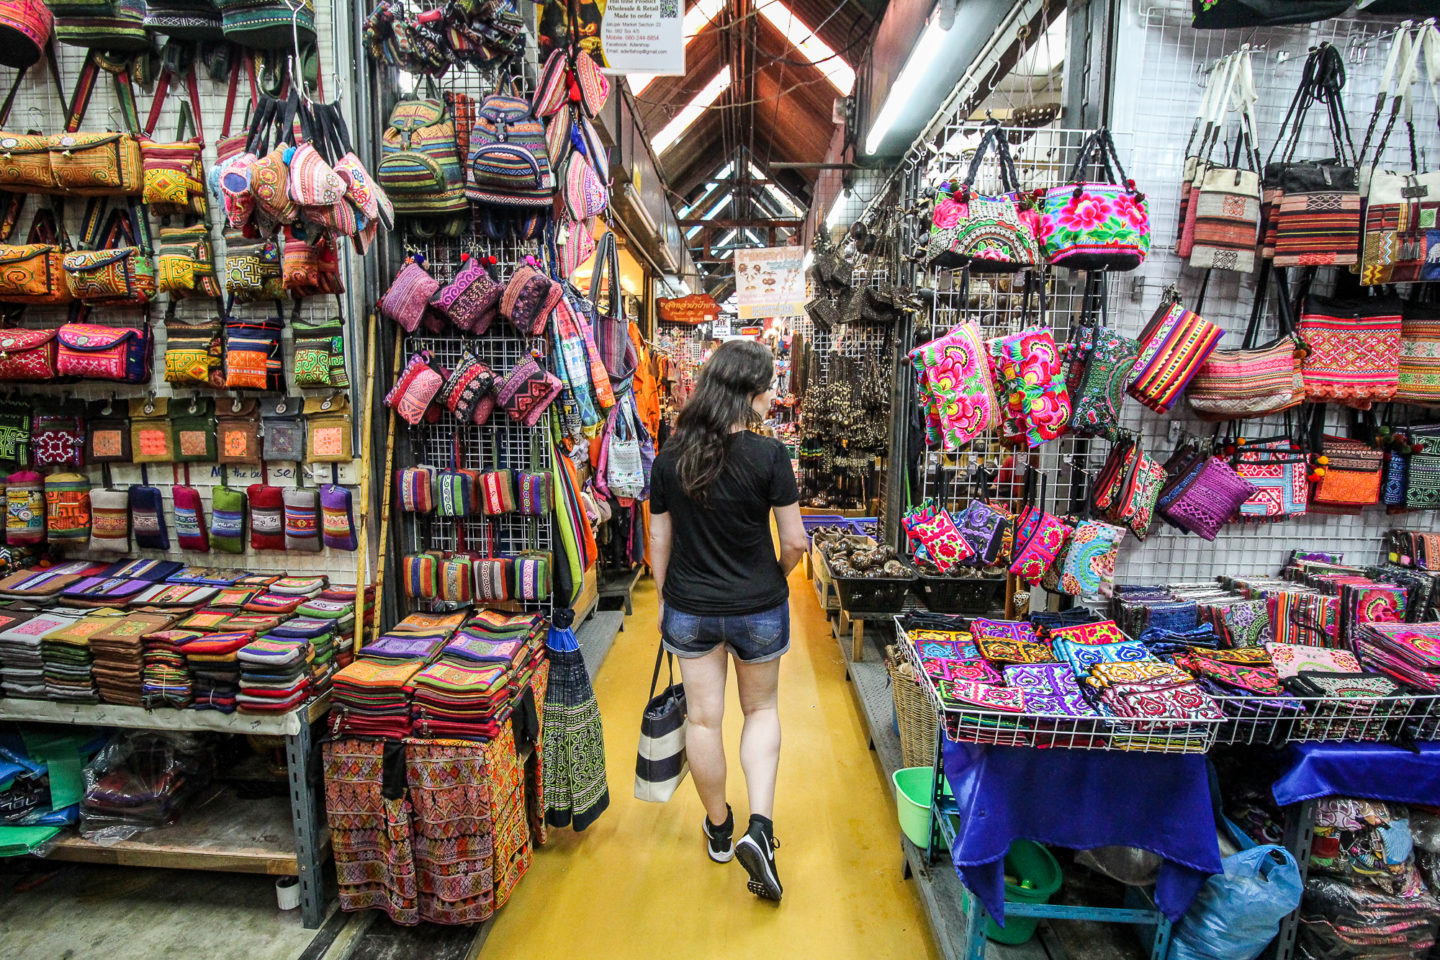 Woman walking through stalls in market covered in bright coloured bags